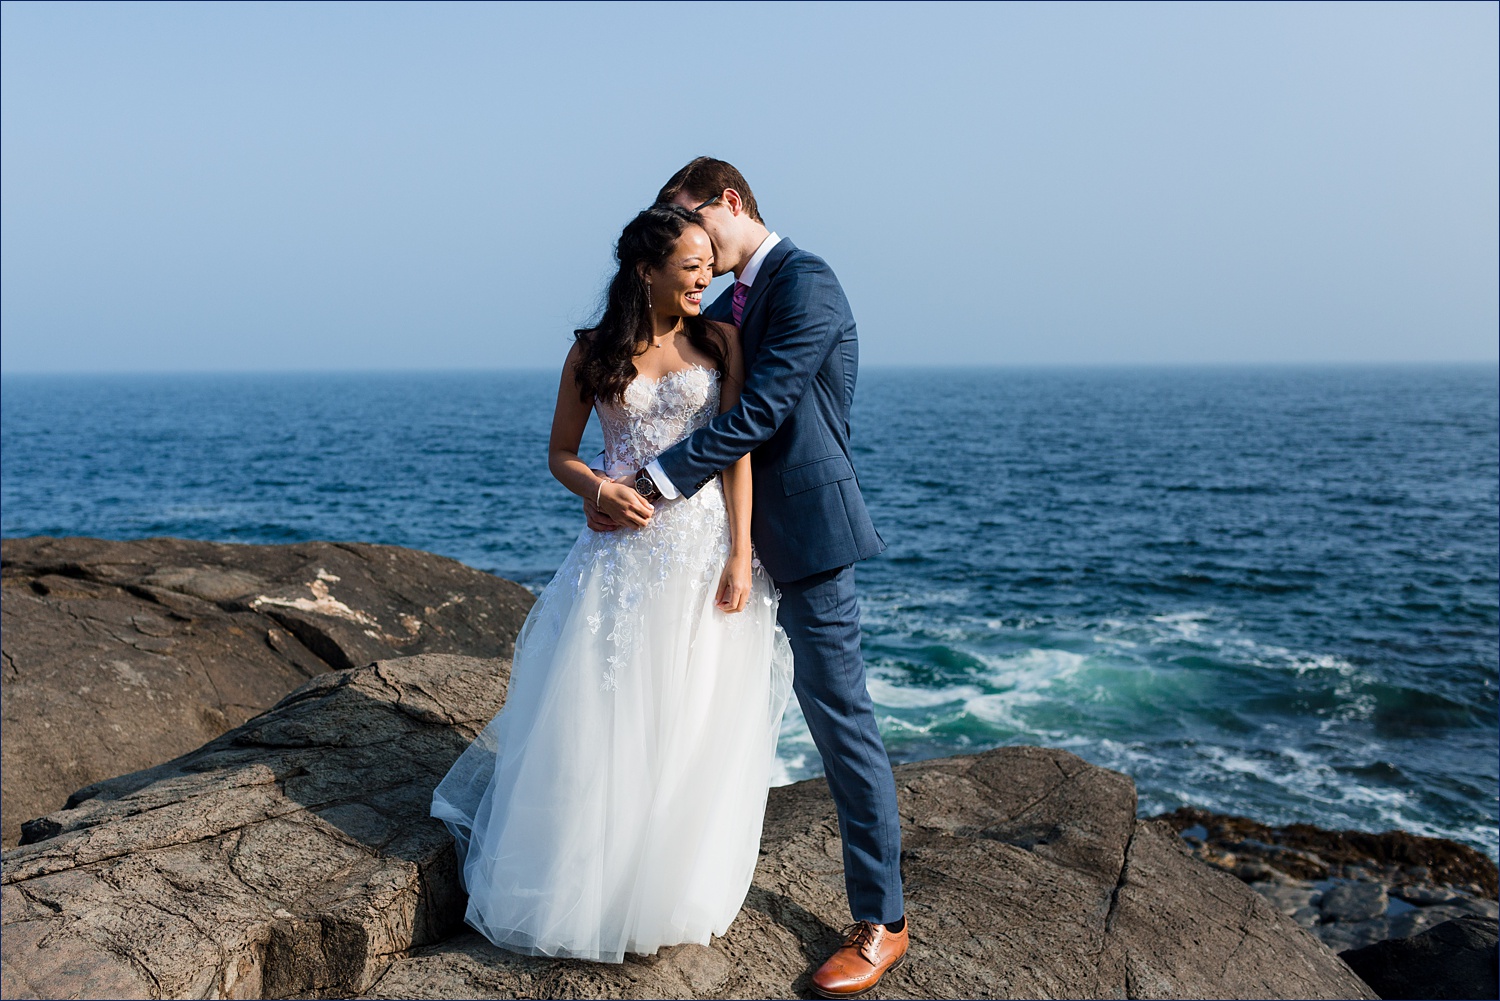 The newlyweds laugh together on the rocky shore of Ogunquit Maine